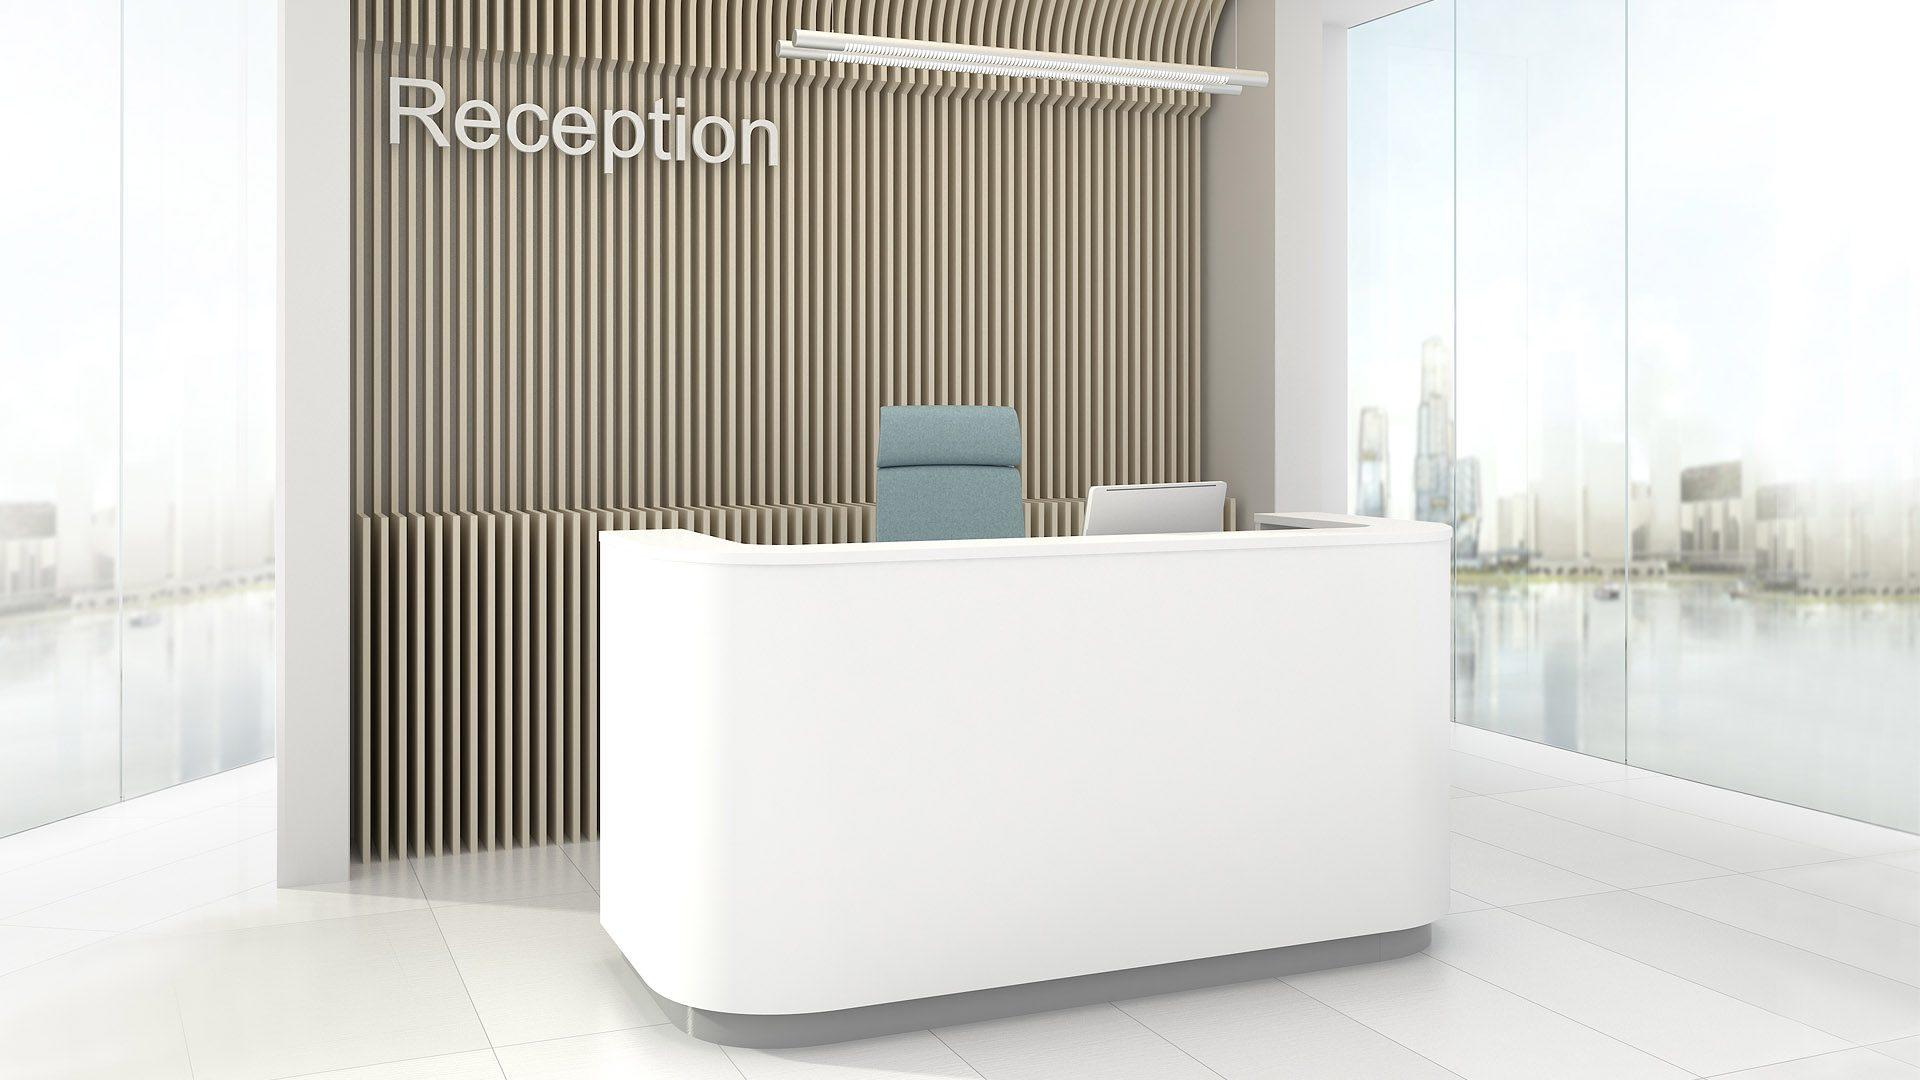 Make the right first impression on your visitors with modern, streamlined reception furniture